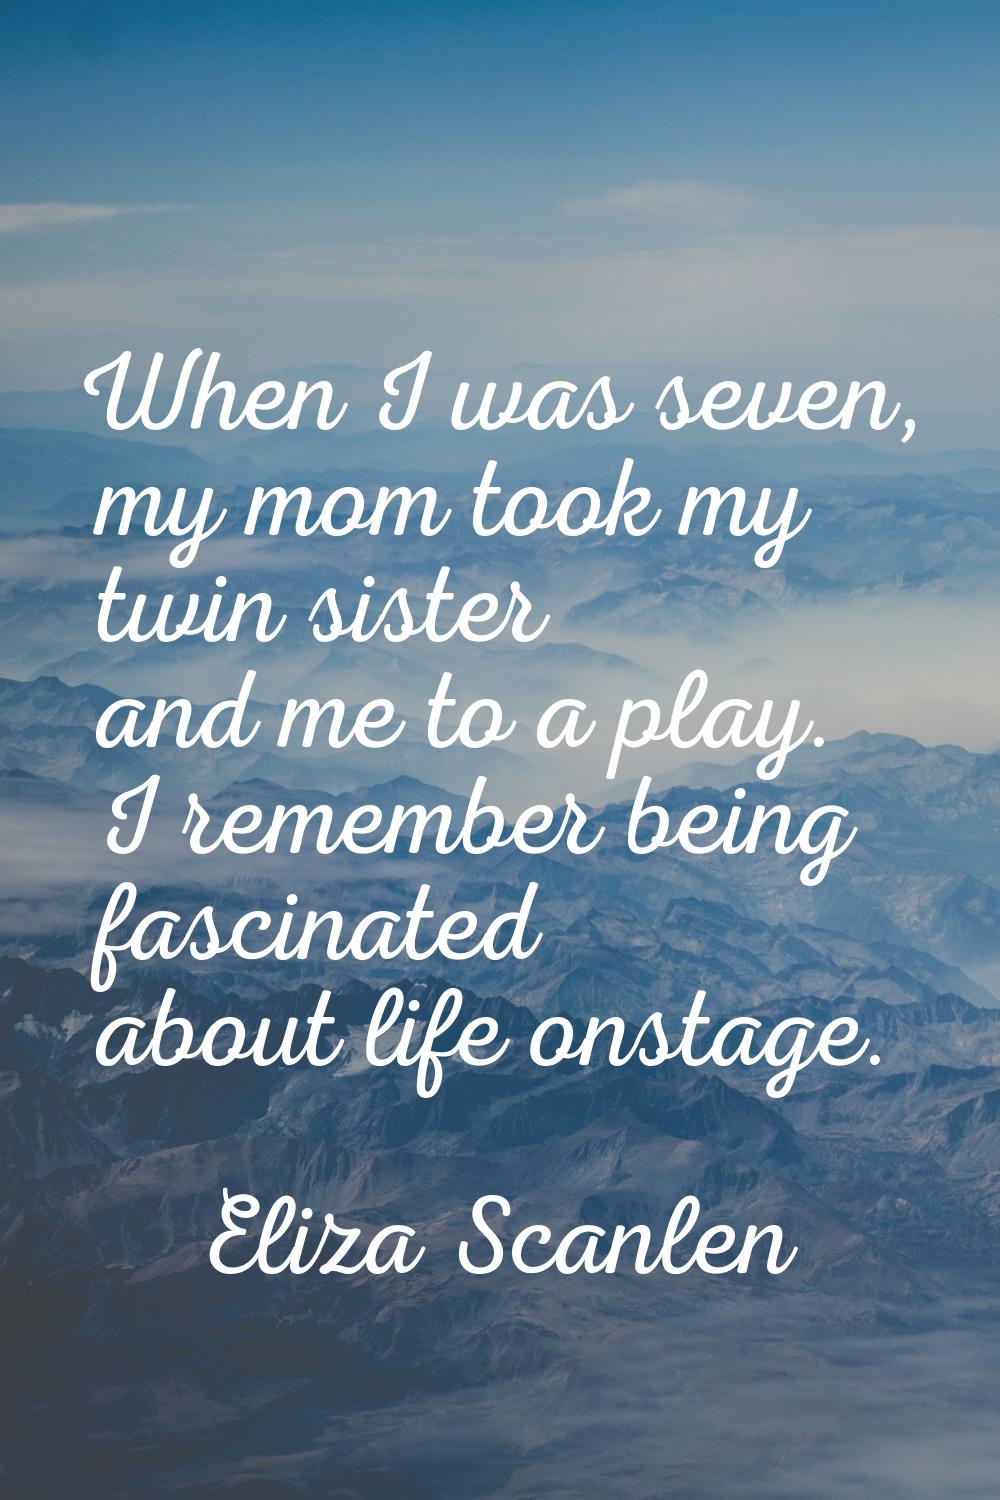 When I was seven, my mom took my twin sister and me to a play. I remember being fascinated about li